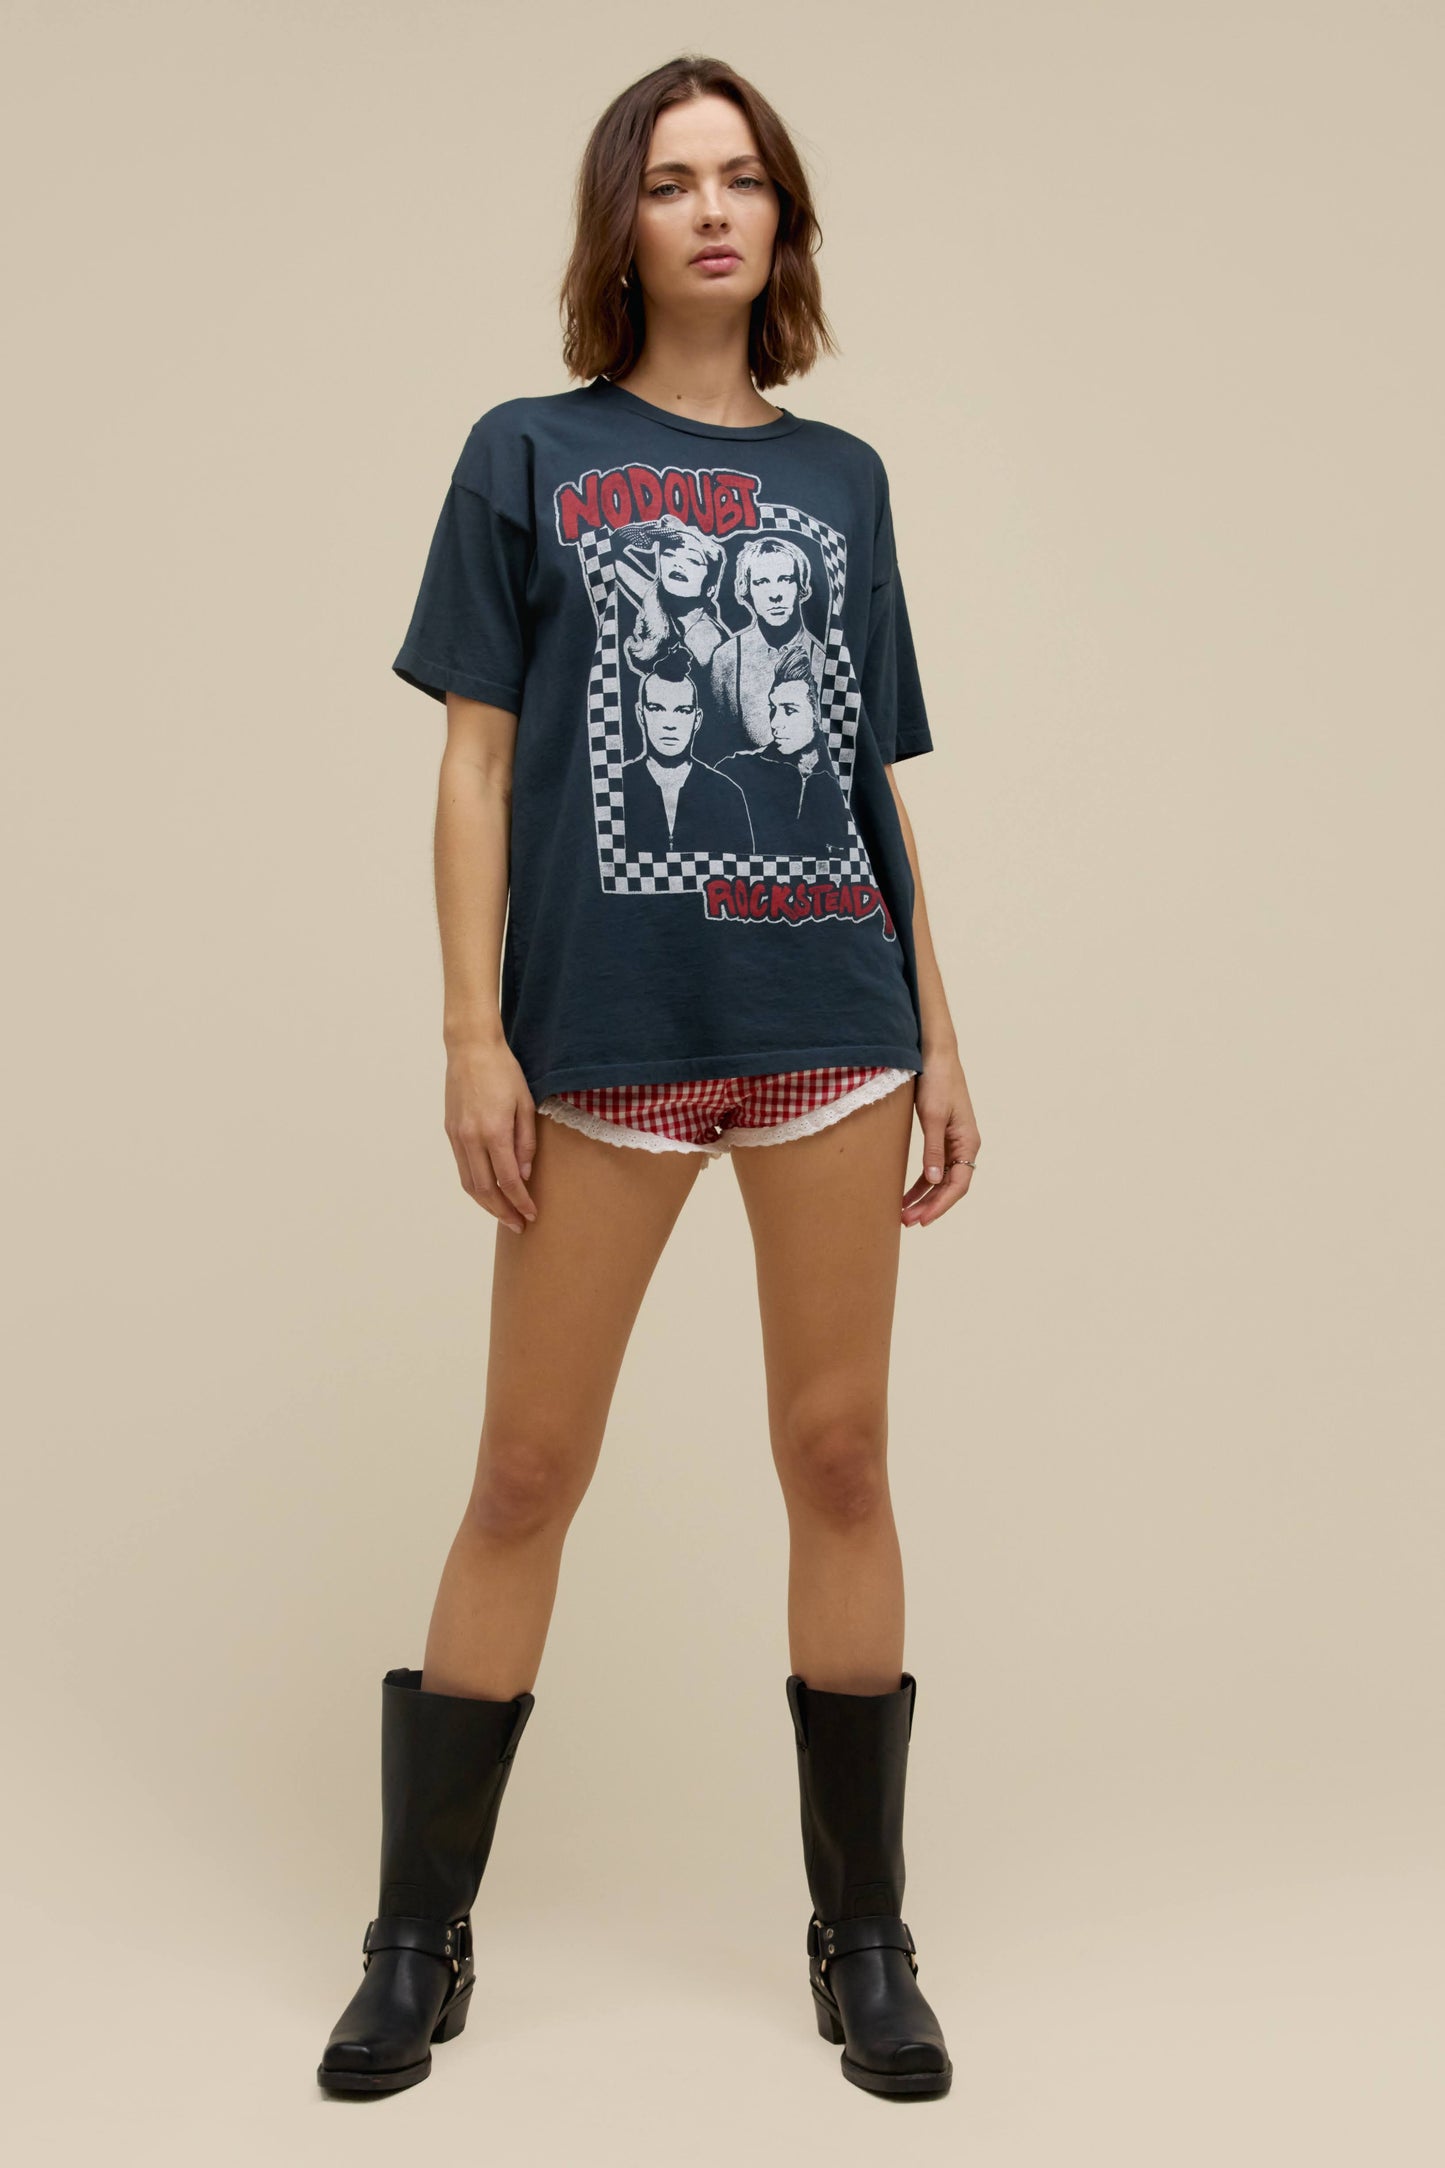 A model featuring a black merch tee design with a group photo of the No Doubt band.